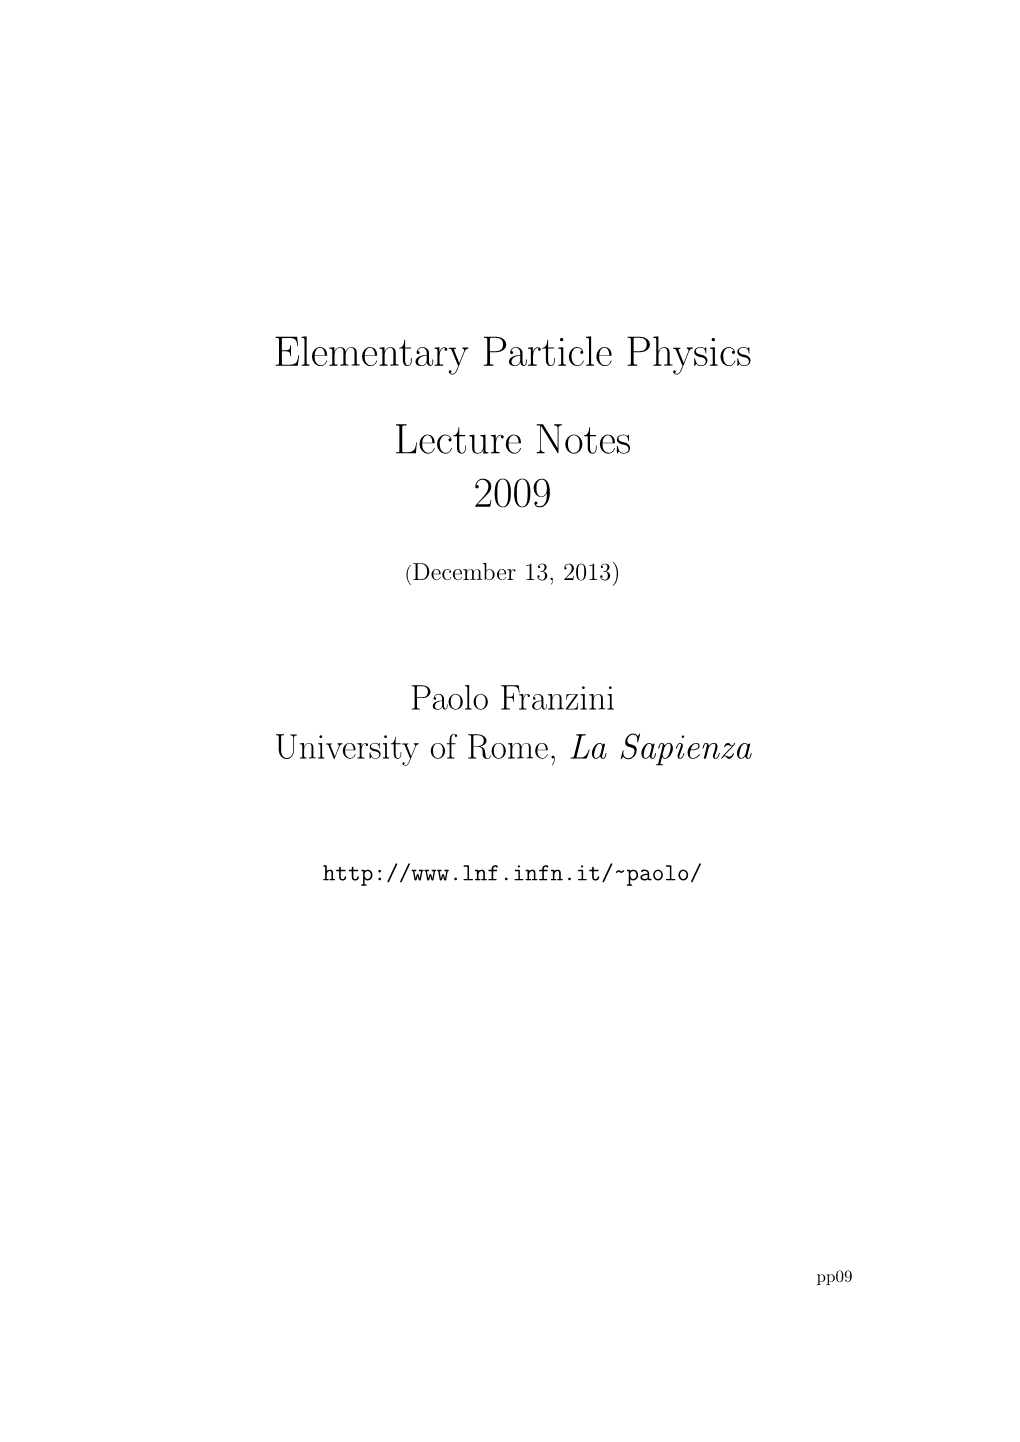 Elementary Particle Physics Lecture Notes 2009